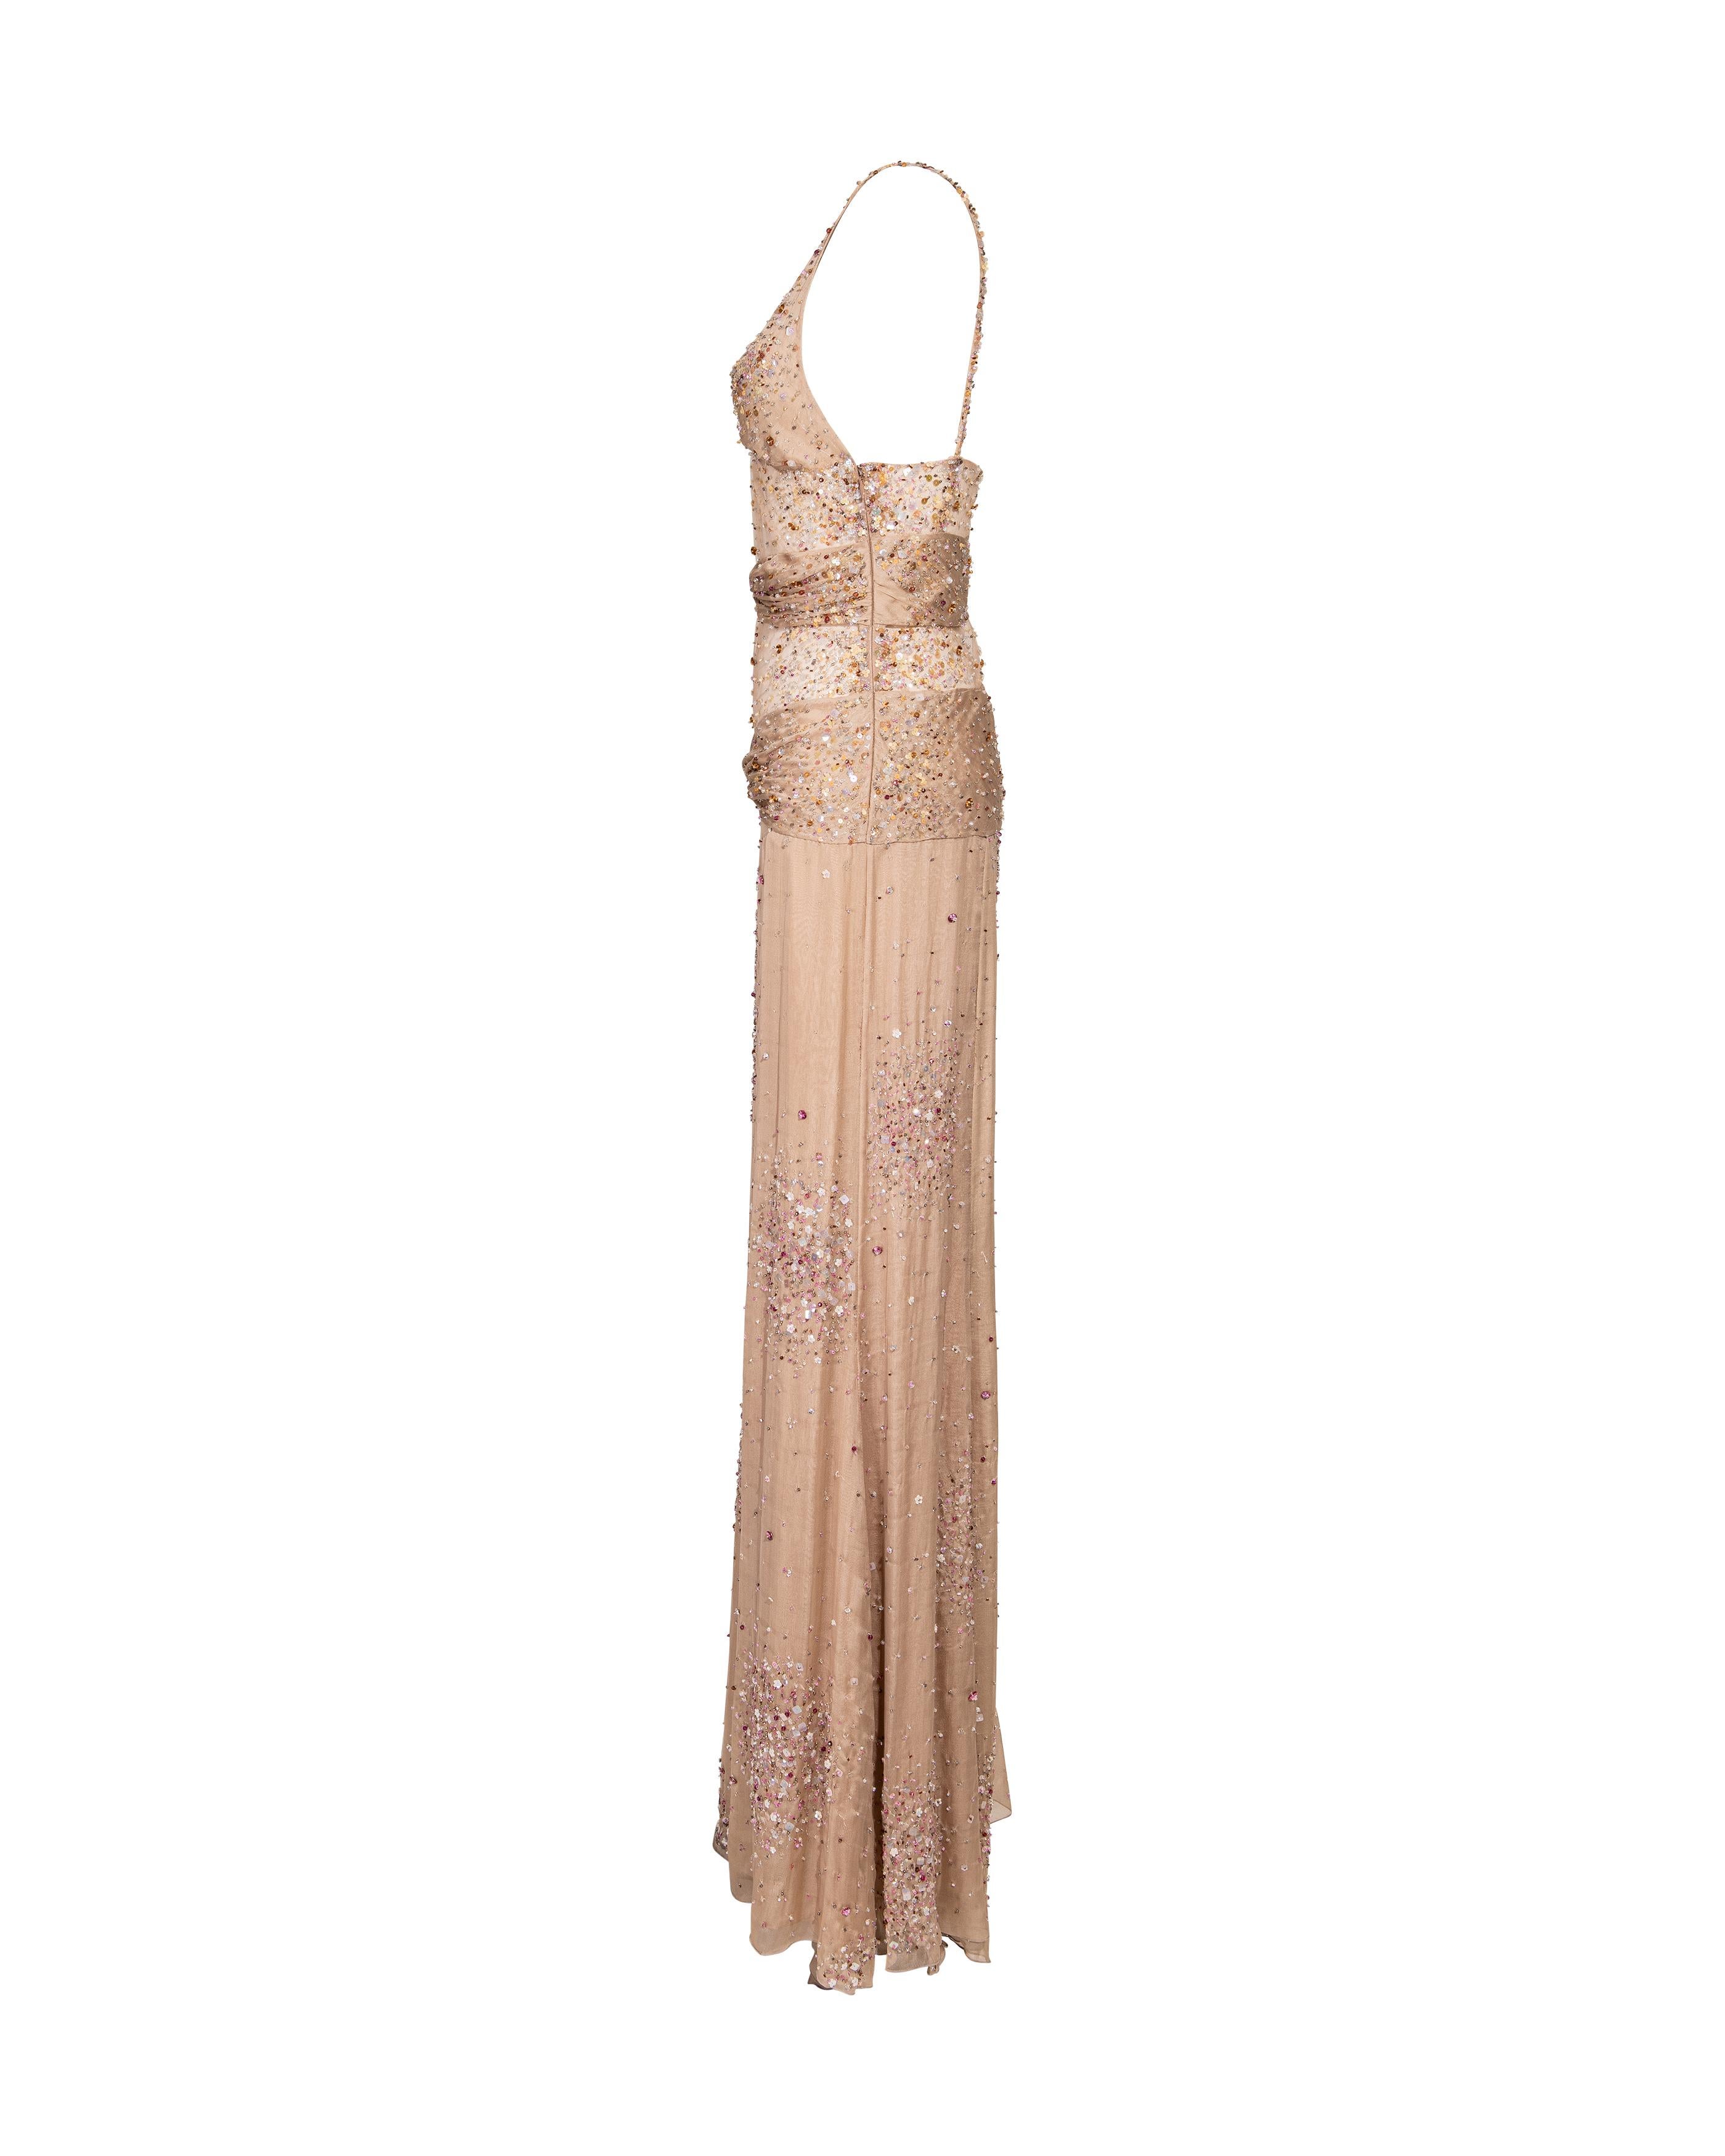 Women's S/S 2001 Valentino Mesh and Silk Tan Embellished Gown